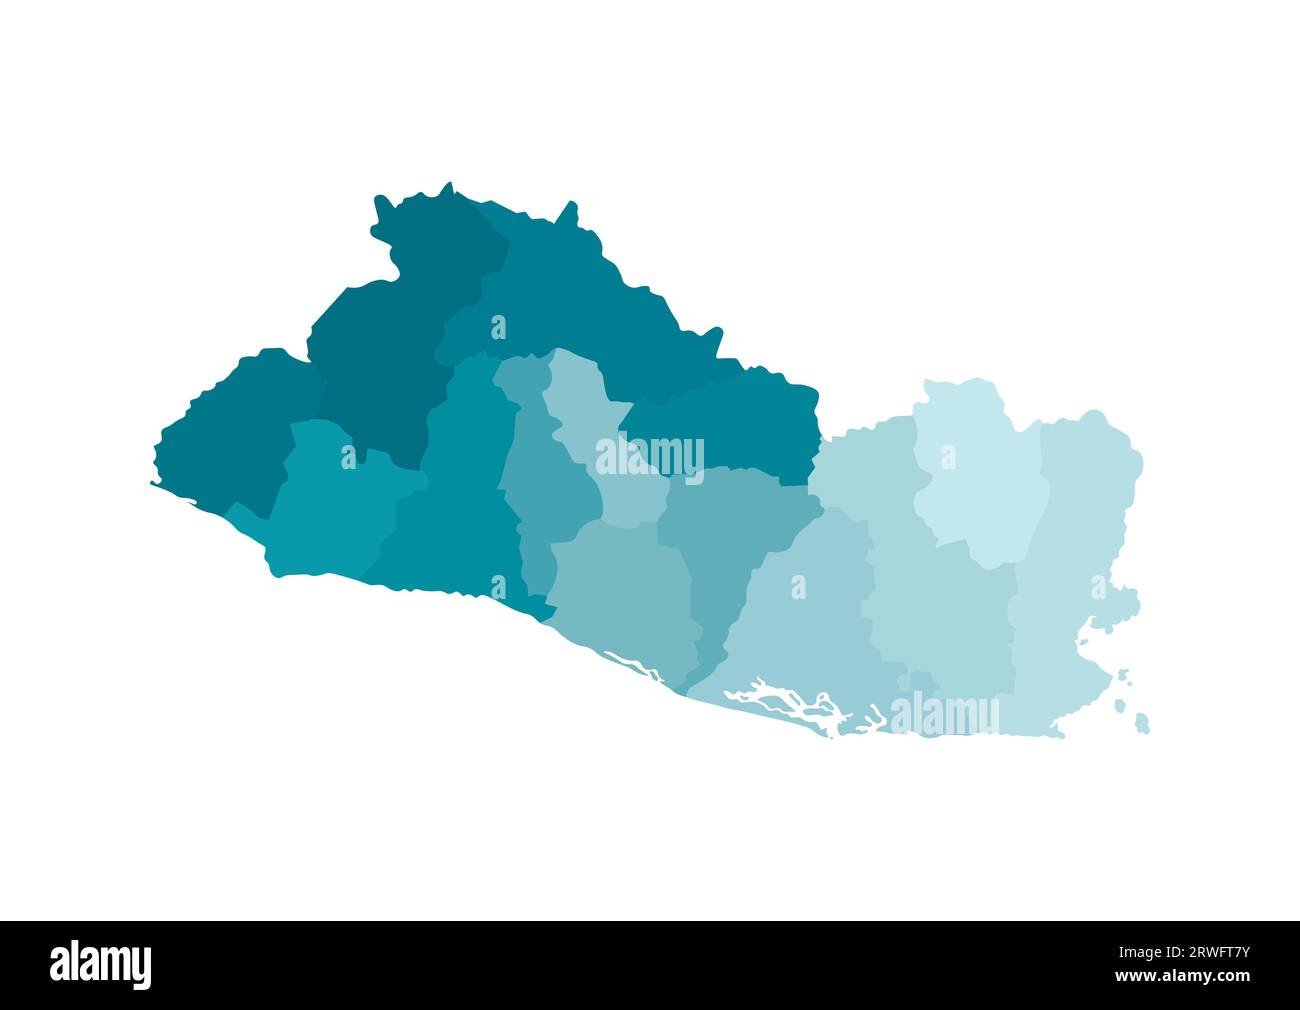 Vector isolated illustration of simplified administrative map of El Salvador. Borders of the departments (regions). Colorful blue khaki silhouettes. Stock Vector